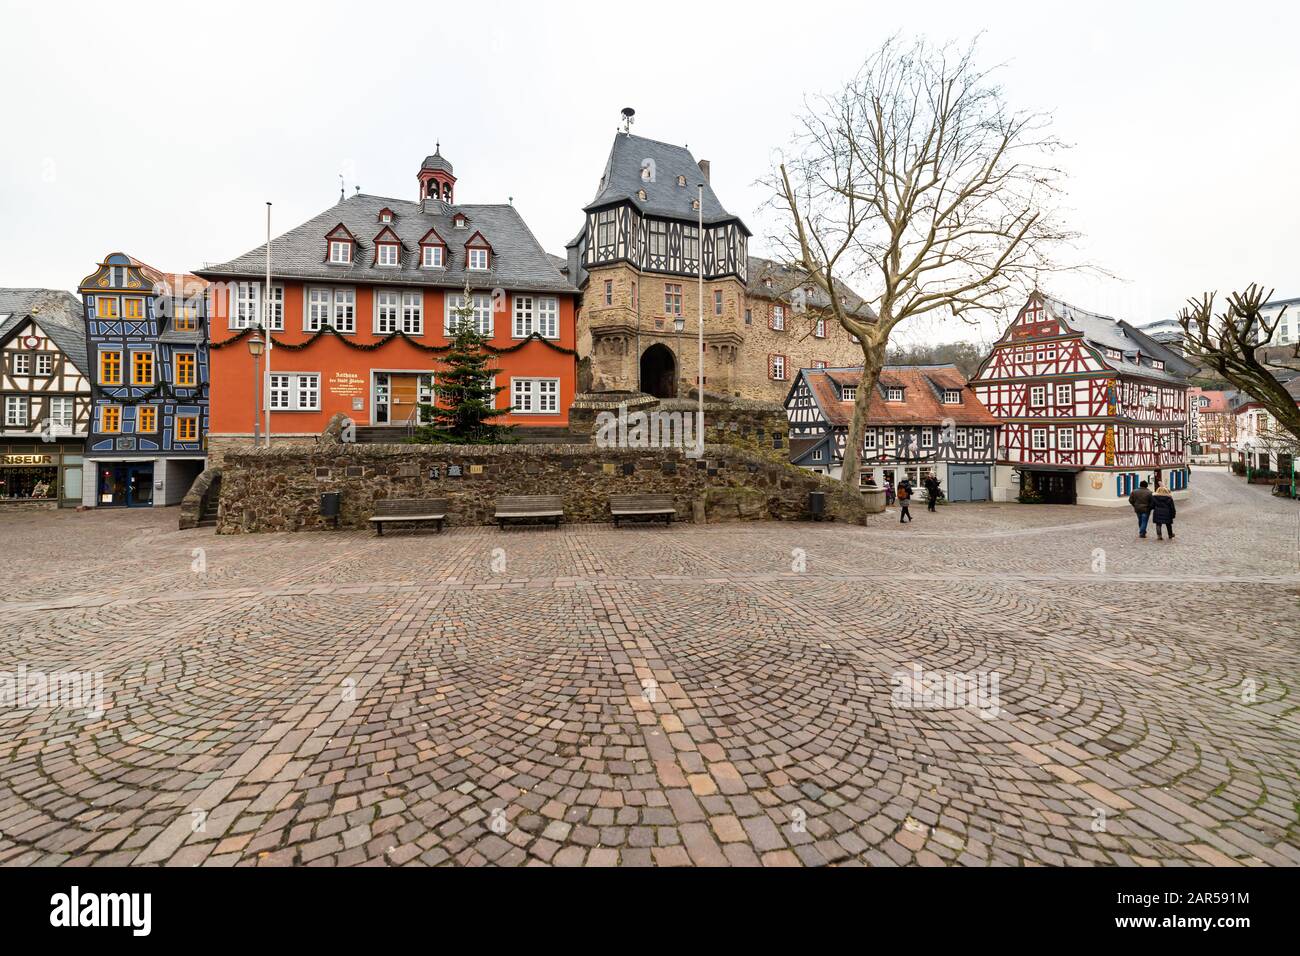 The ancient town of Idstein in germany Stock Photo